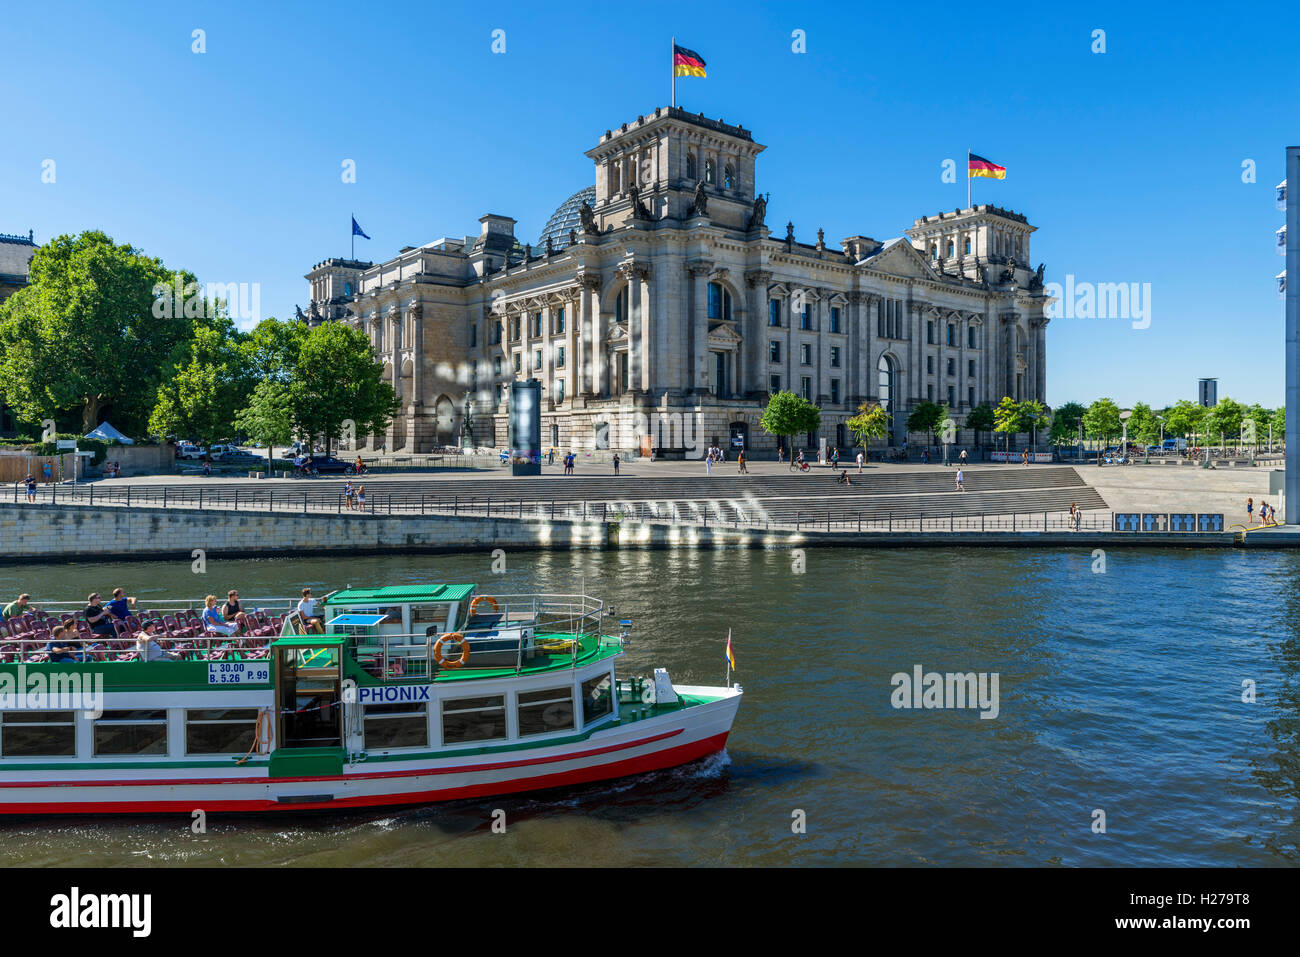 River cruise boat on the Spree River in front of the Reichstag building, Mitte, Berlin, Germany Stock Photo